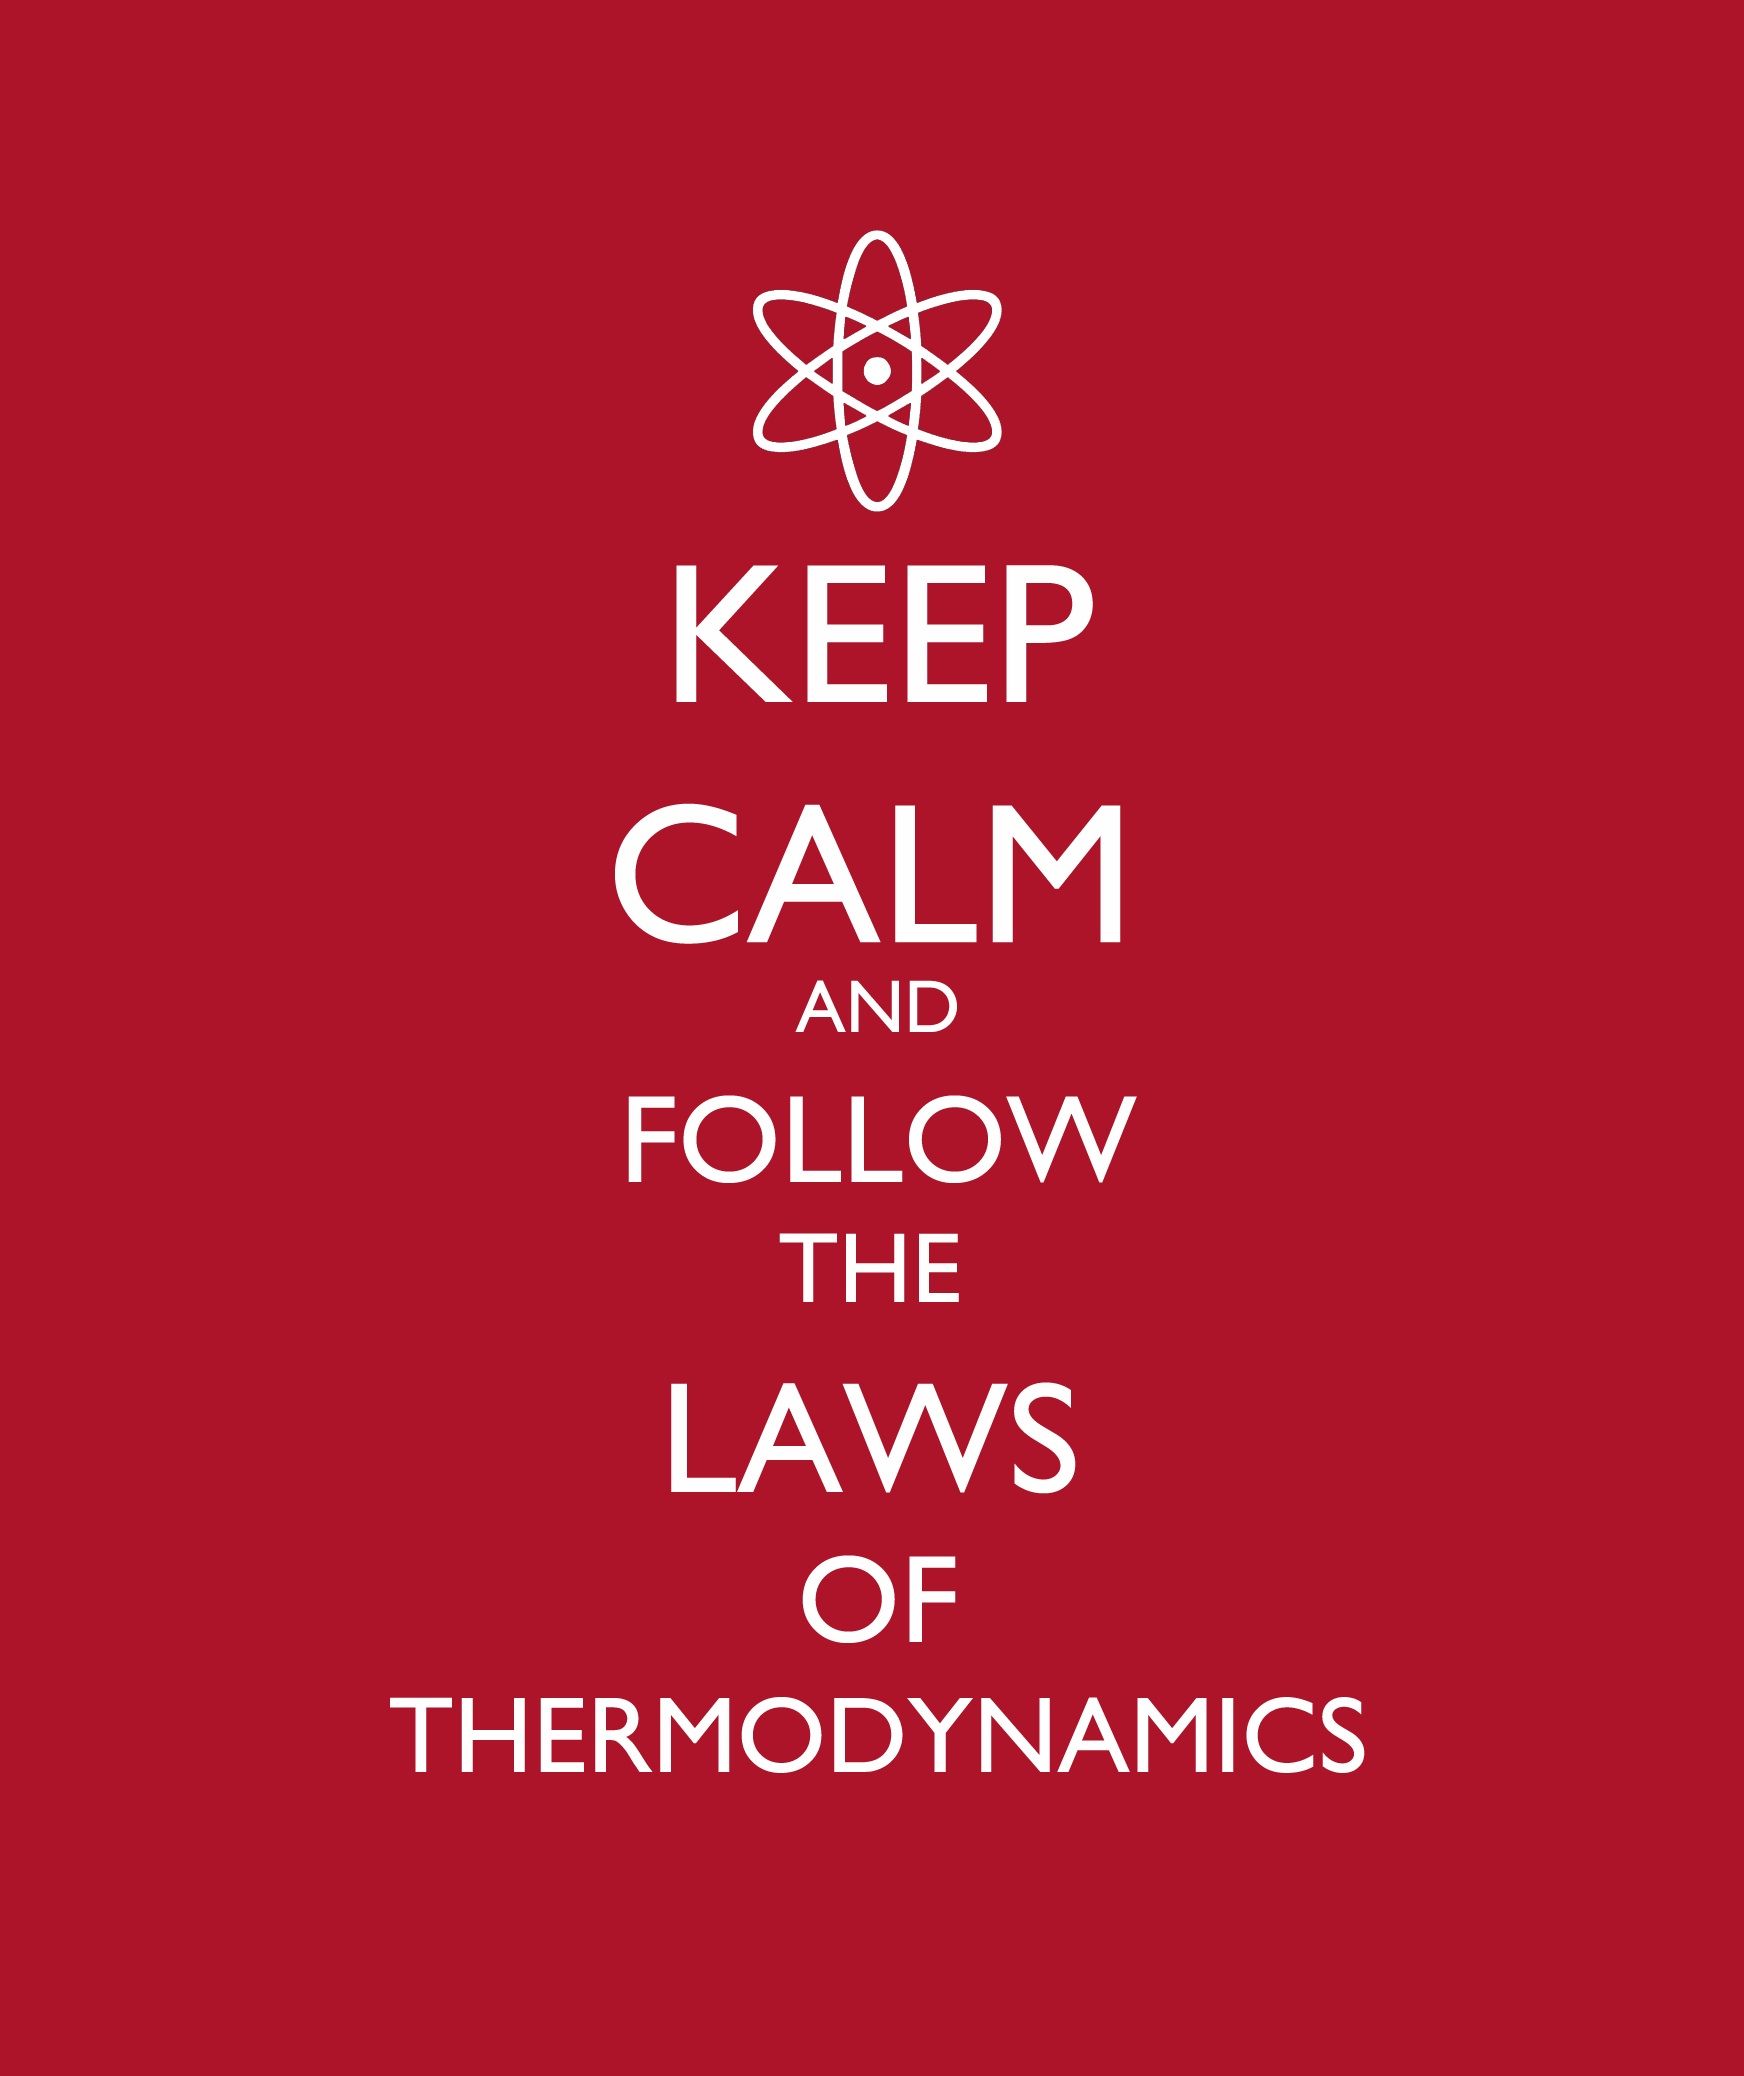 Sound advice: Keep Calm and Follow the Laws of Thermodynamics